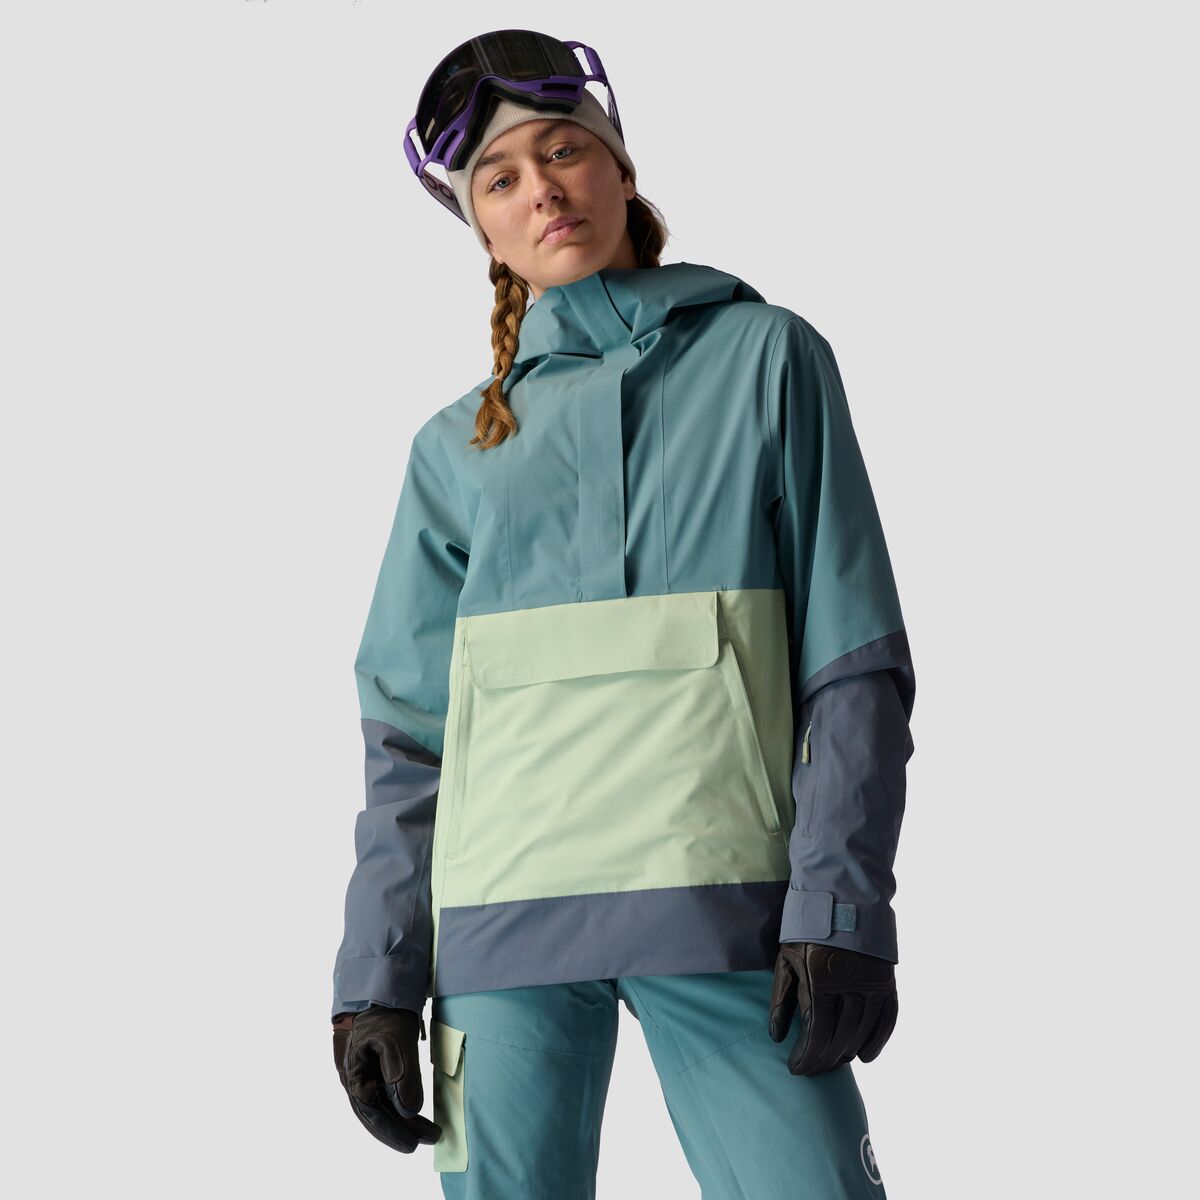 Backcountry Last Chair Stretch Insulated One-Piece Suit - Women's Sandpiper/Mountain Fog, XXL